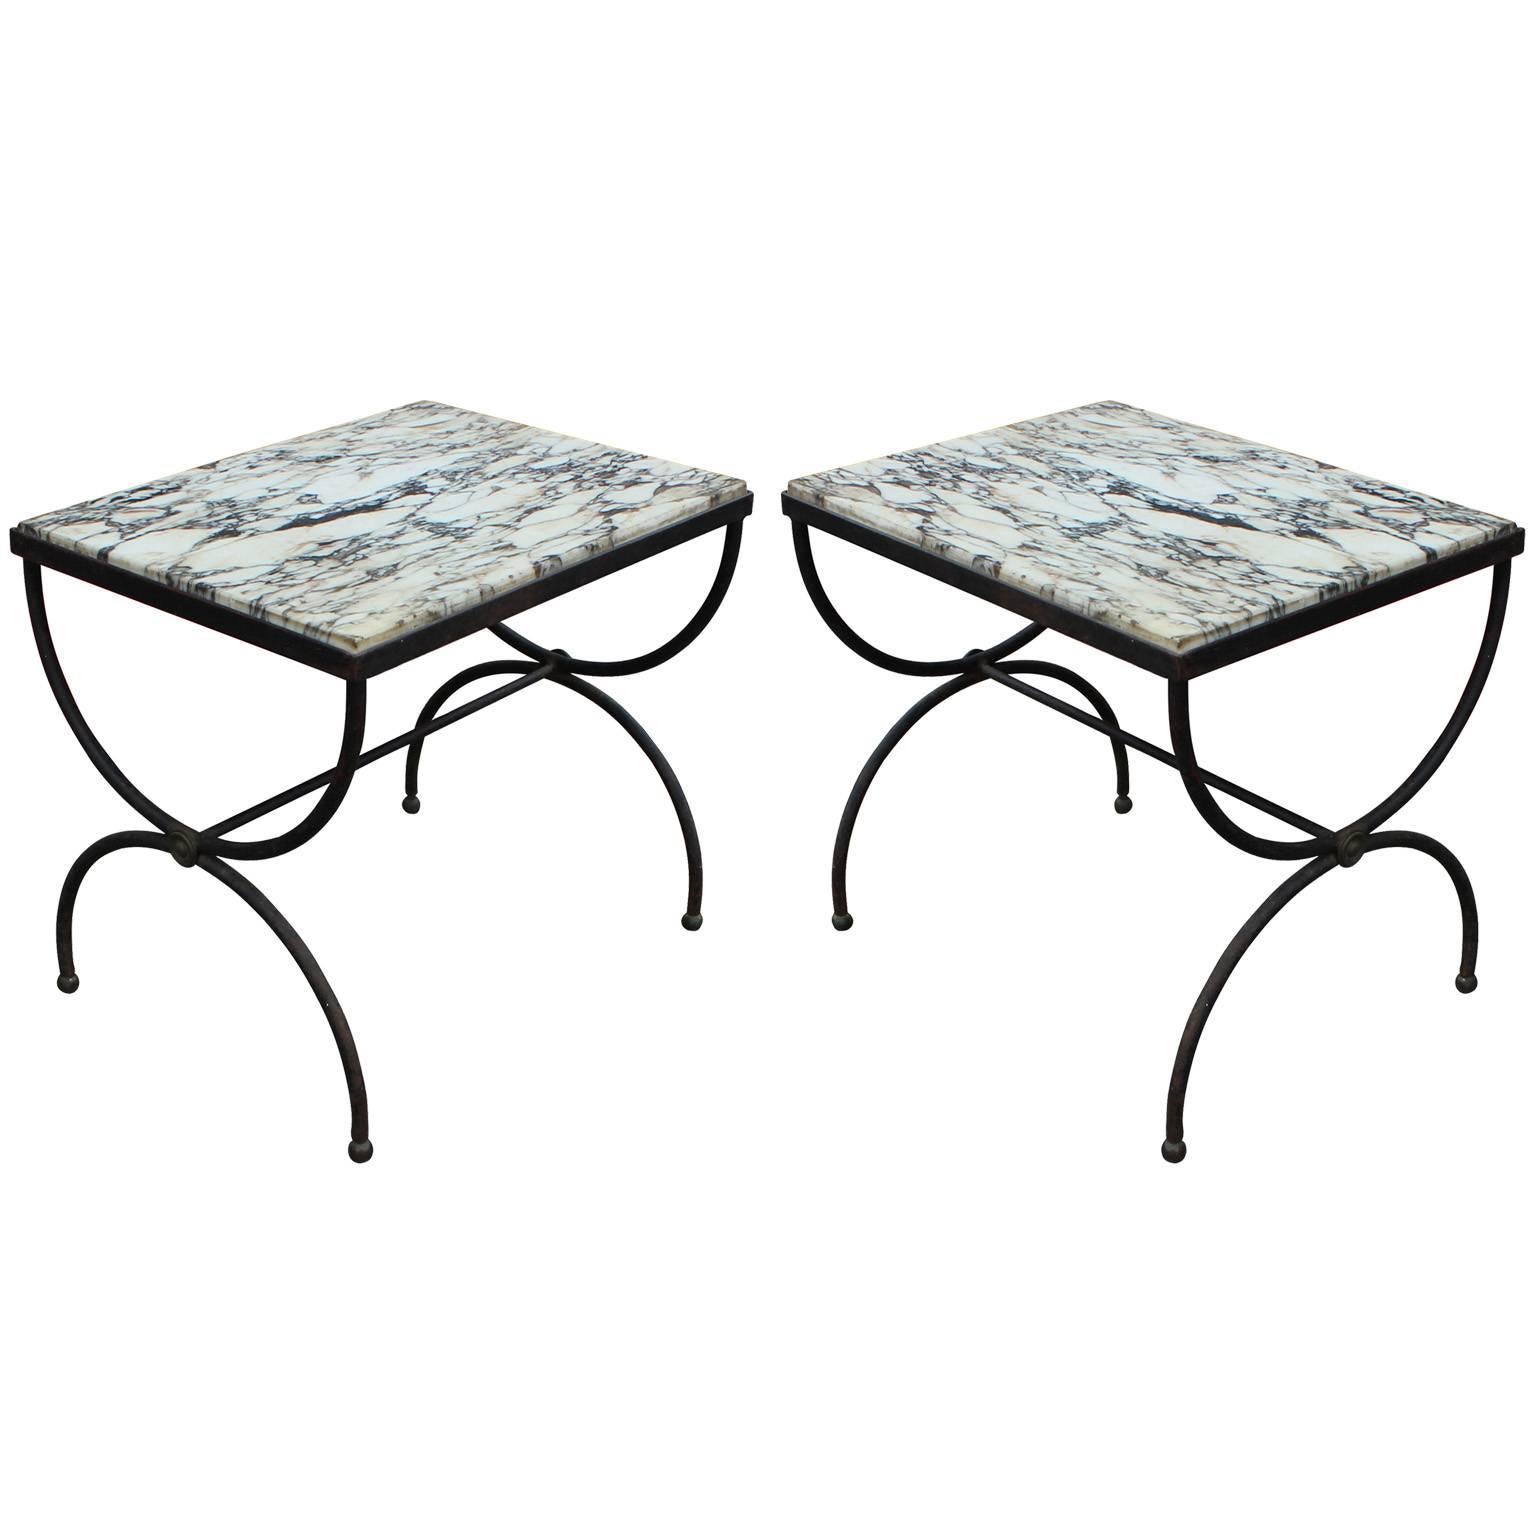 Lovely Pair of Wrought Iron and Marble Cerule Modern Side Tables